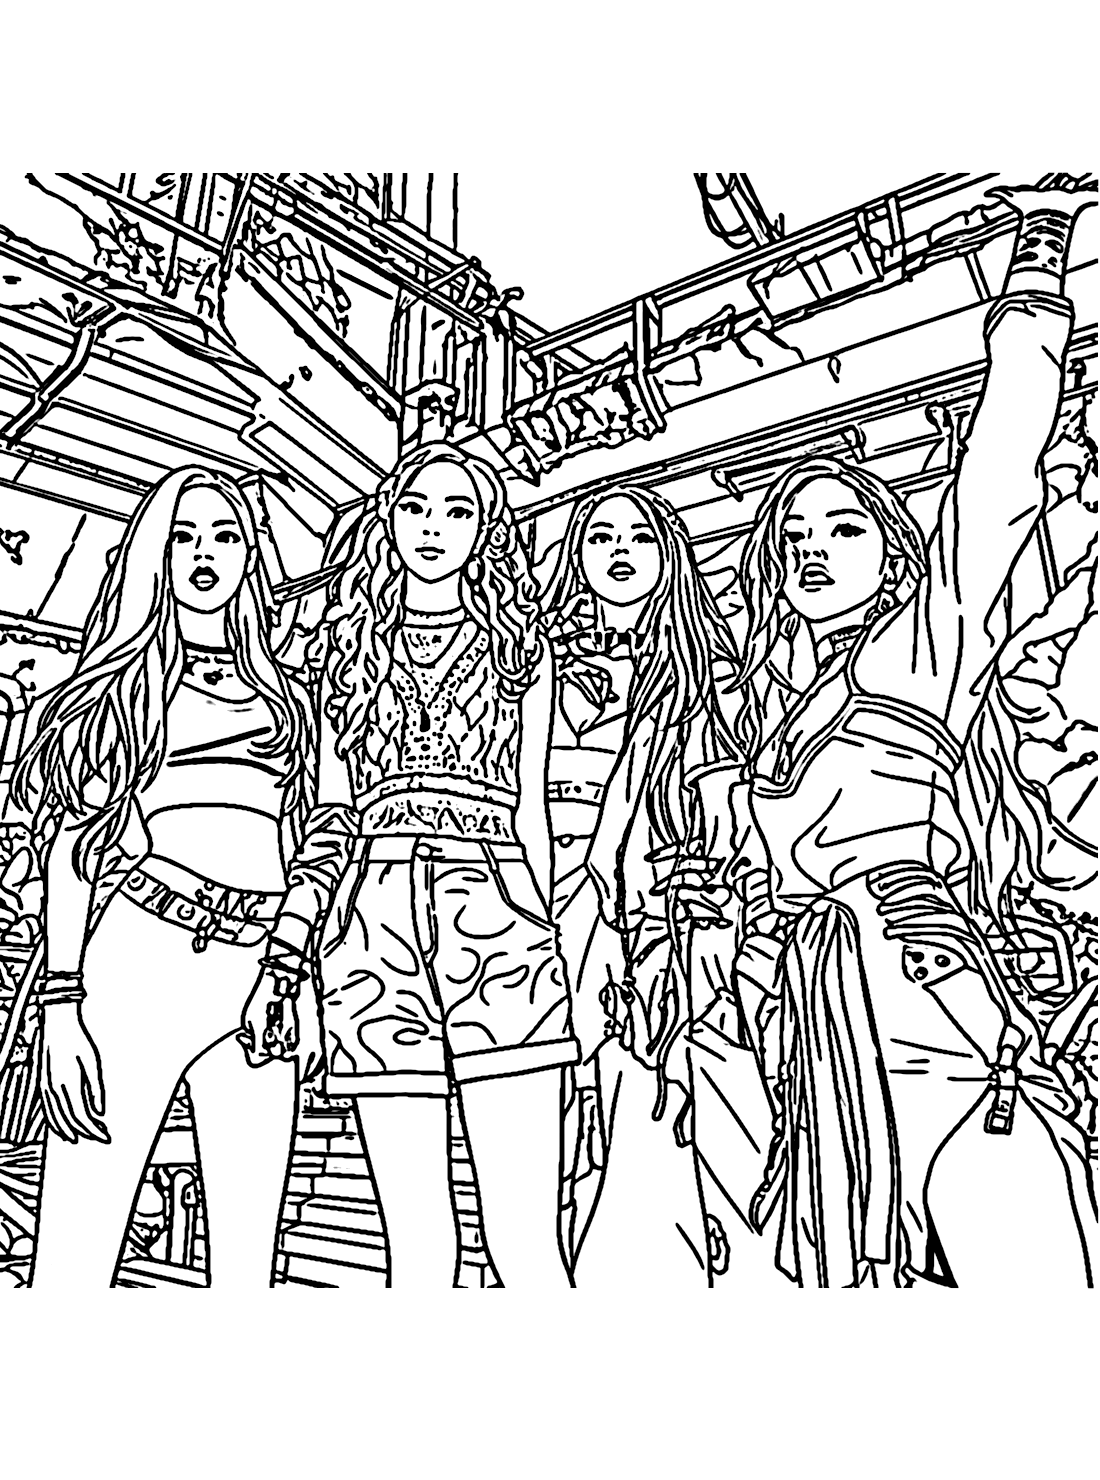 Kpop coloring pages blackpink